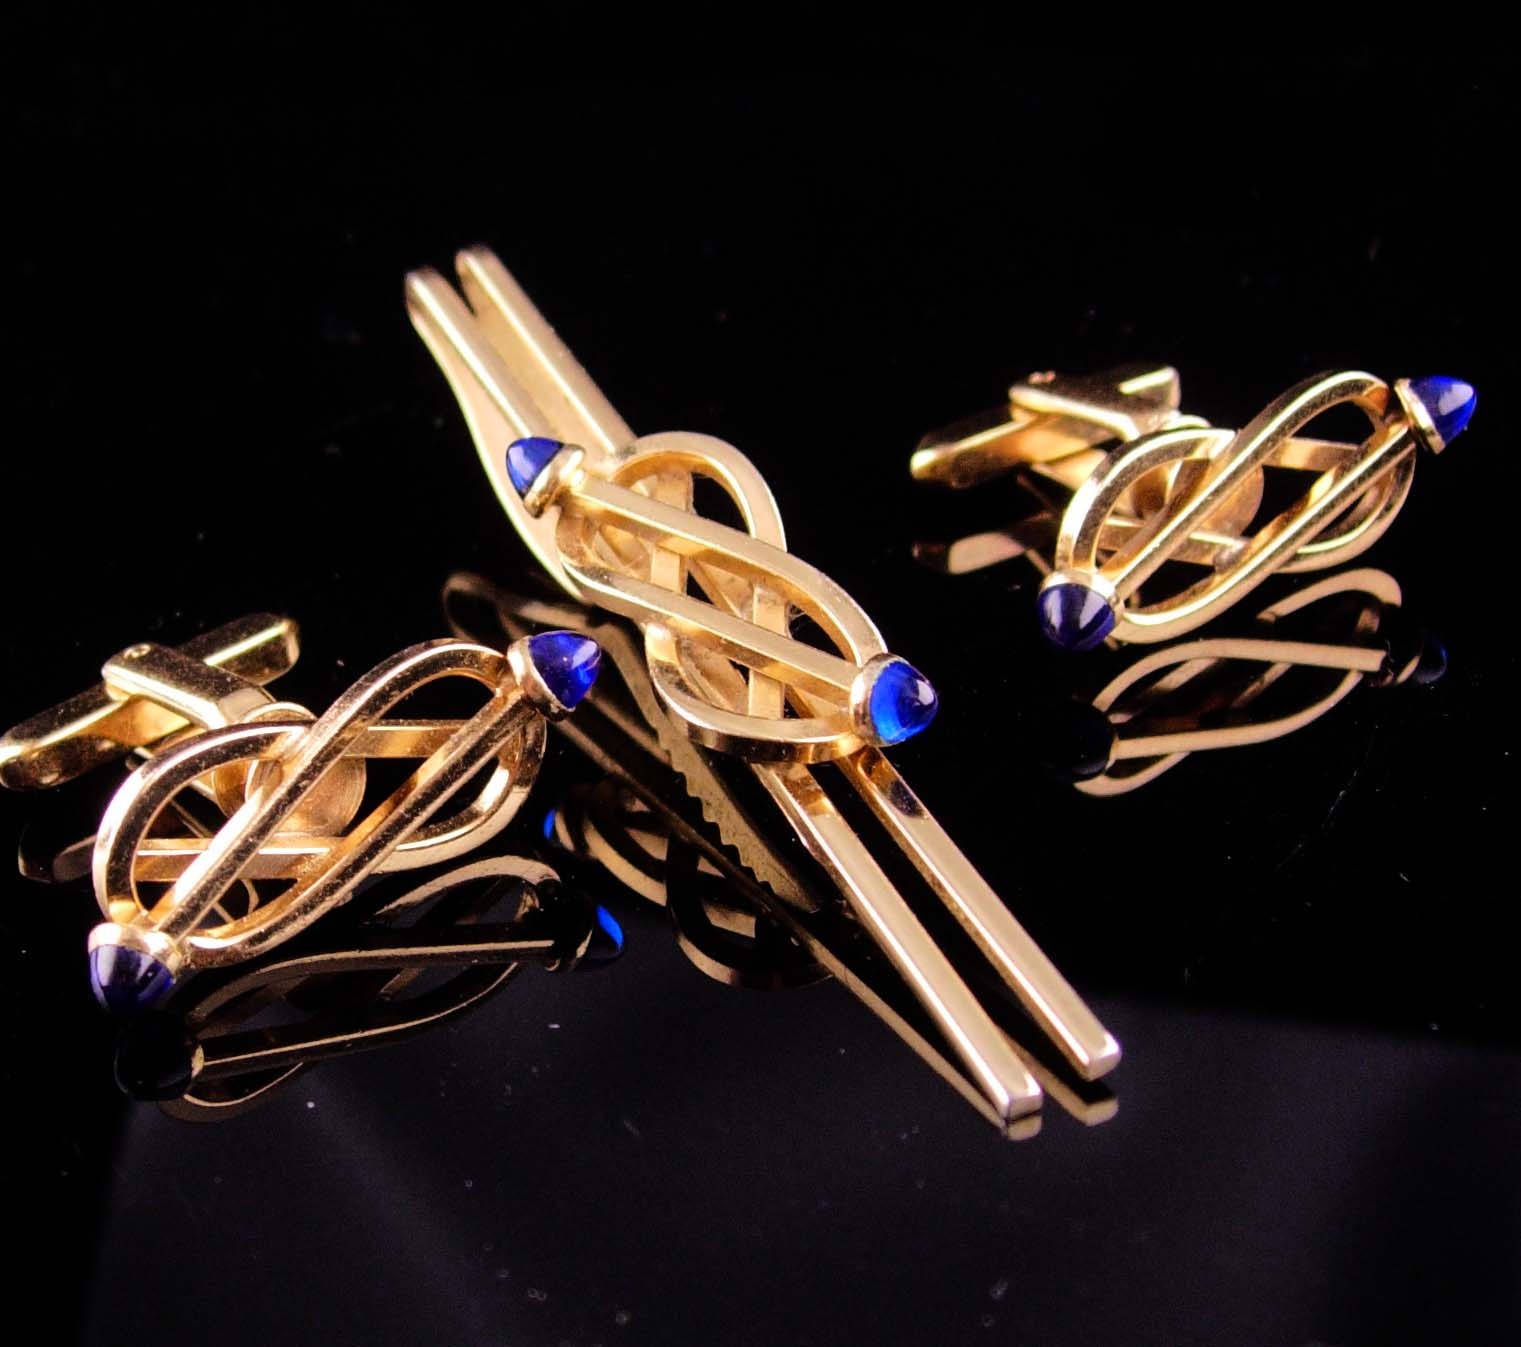 Primary image for Wedding cufflinks / Blue Love knot / Gold Tie clip  / Vintage jewel ends / tuxed